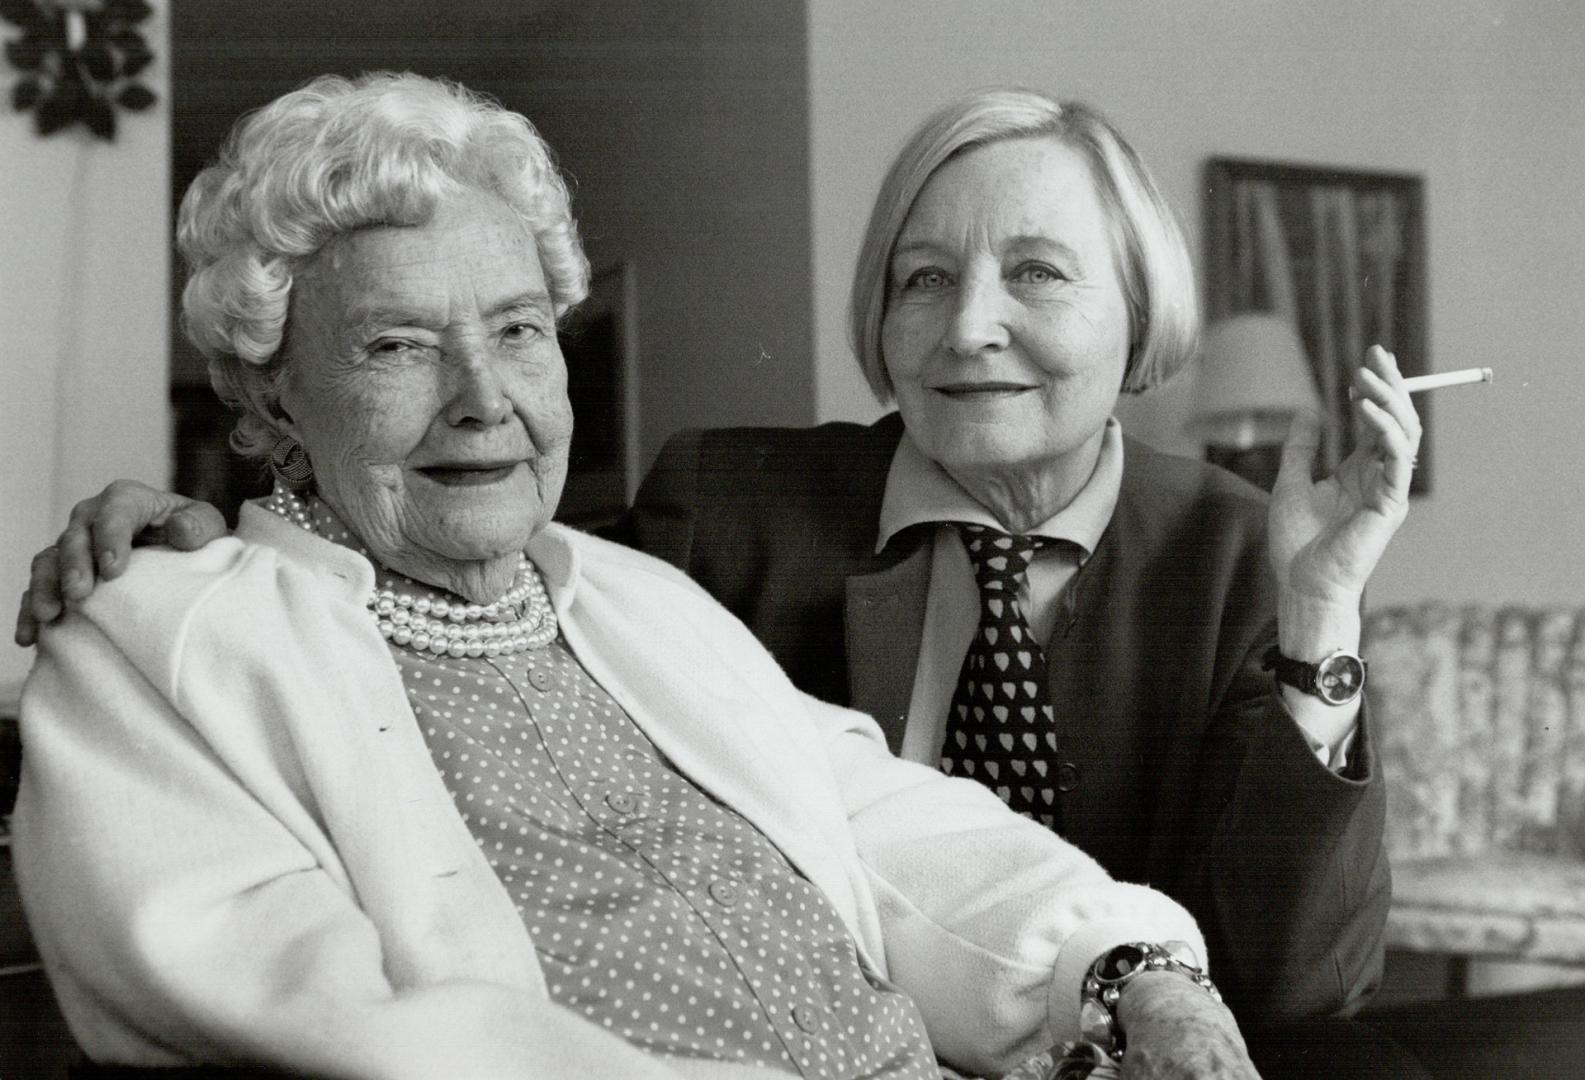 Nora Wedd is 100 on Tuesday and in her honor Sue Polanyi is giving up smoking